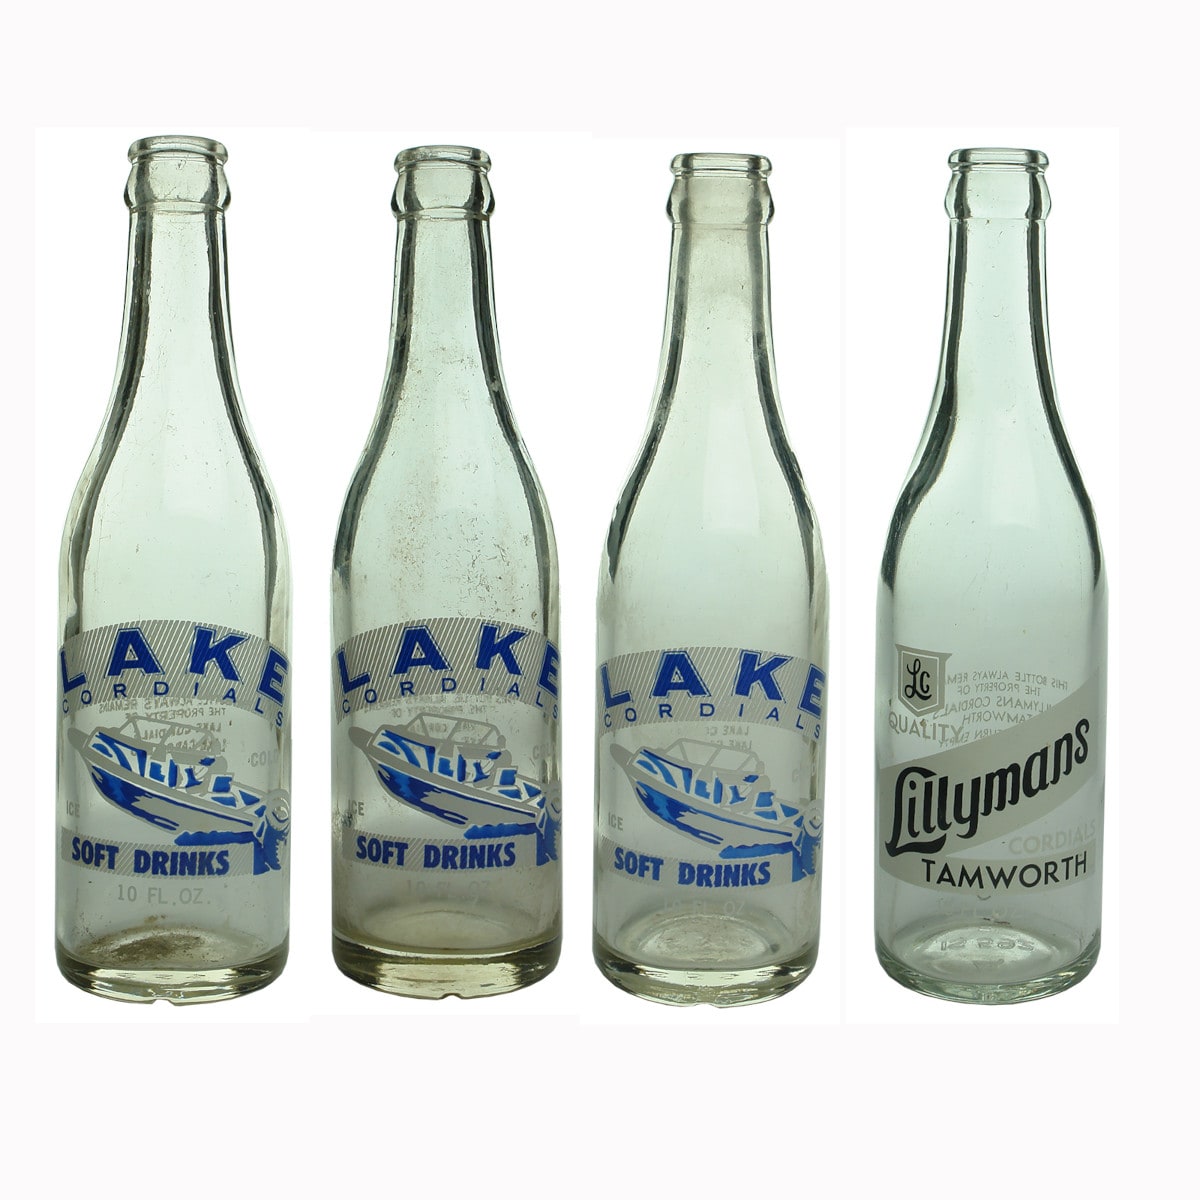 Four 10 oz Ceramic Label Crown Seals. Lake Cordials and Lillymans.